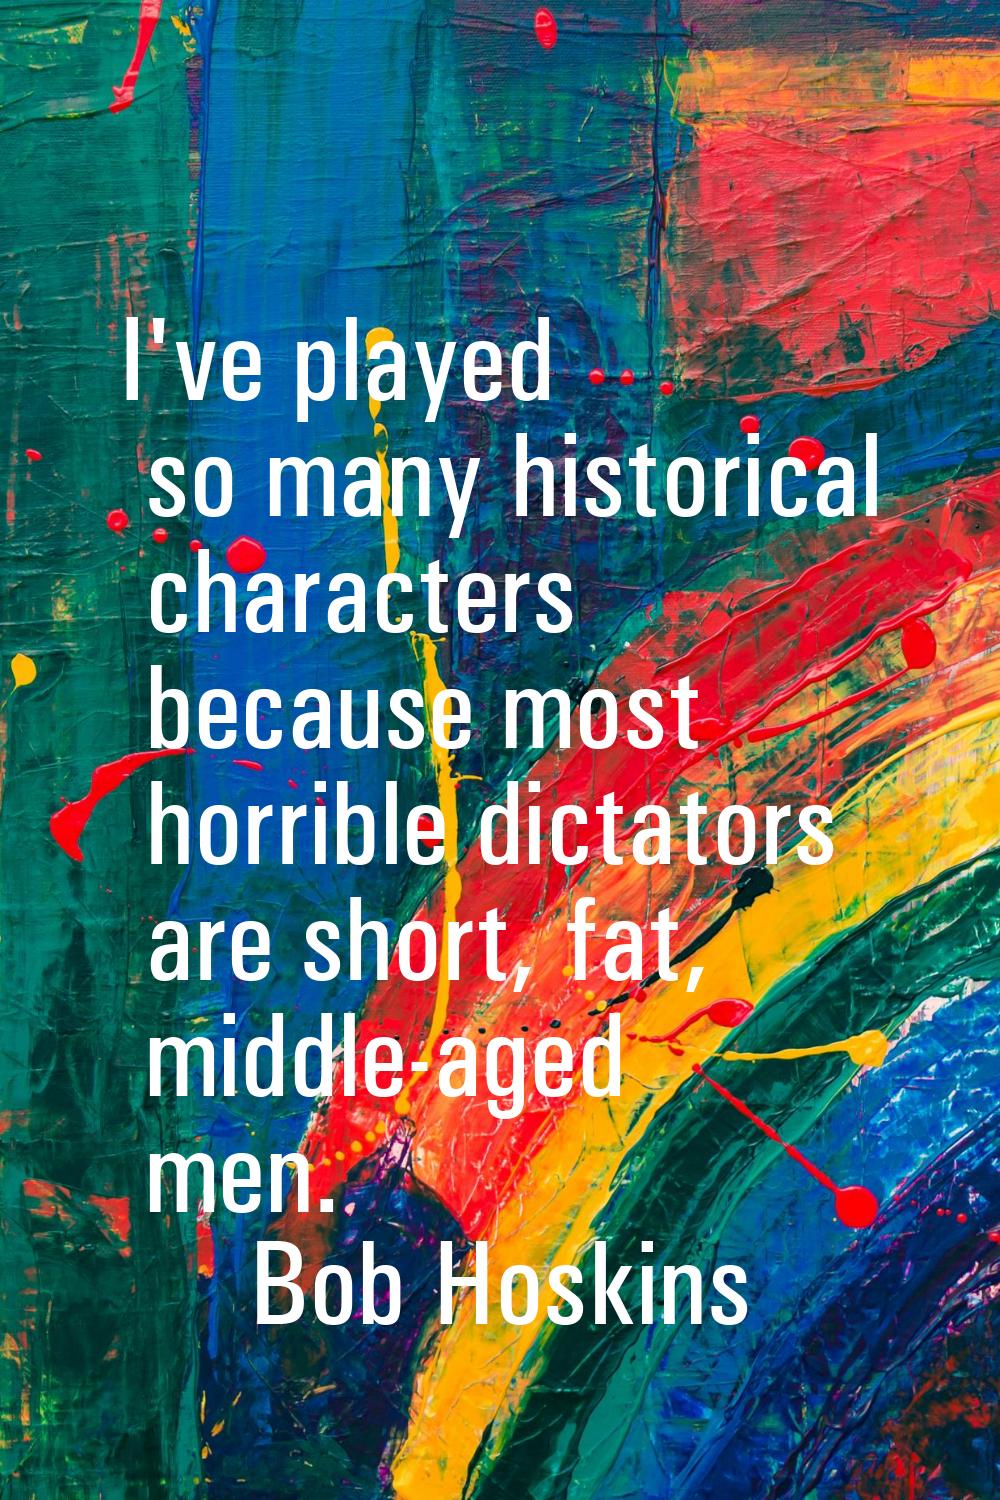 I've played so many historical characters because most horrible dictators are short, fat, middle-ag